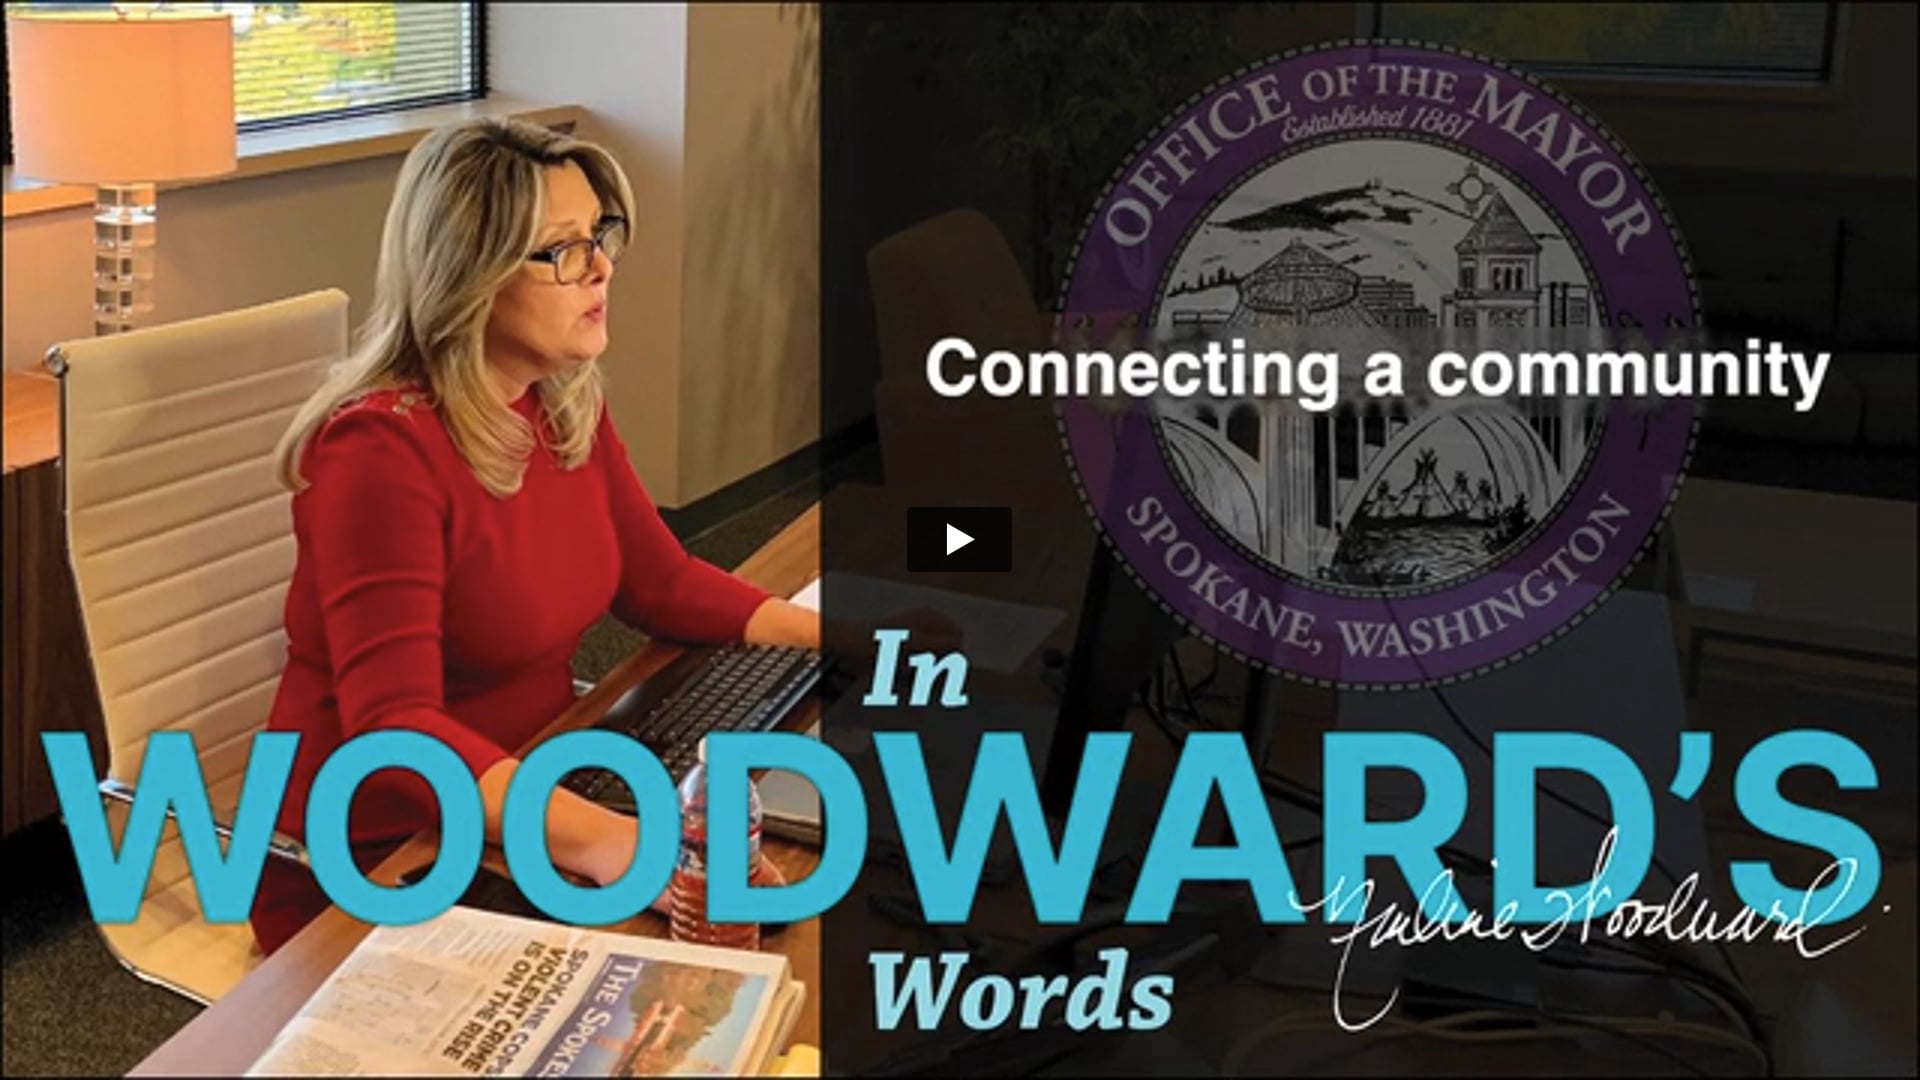 In Woodward's Words - Connecting A Community